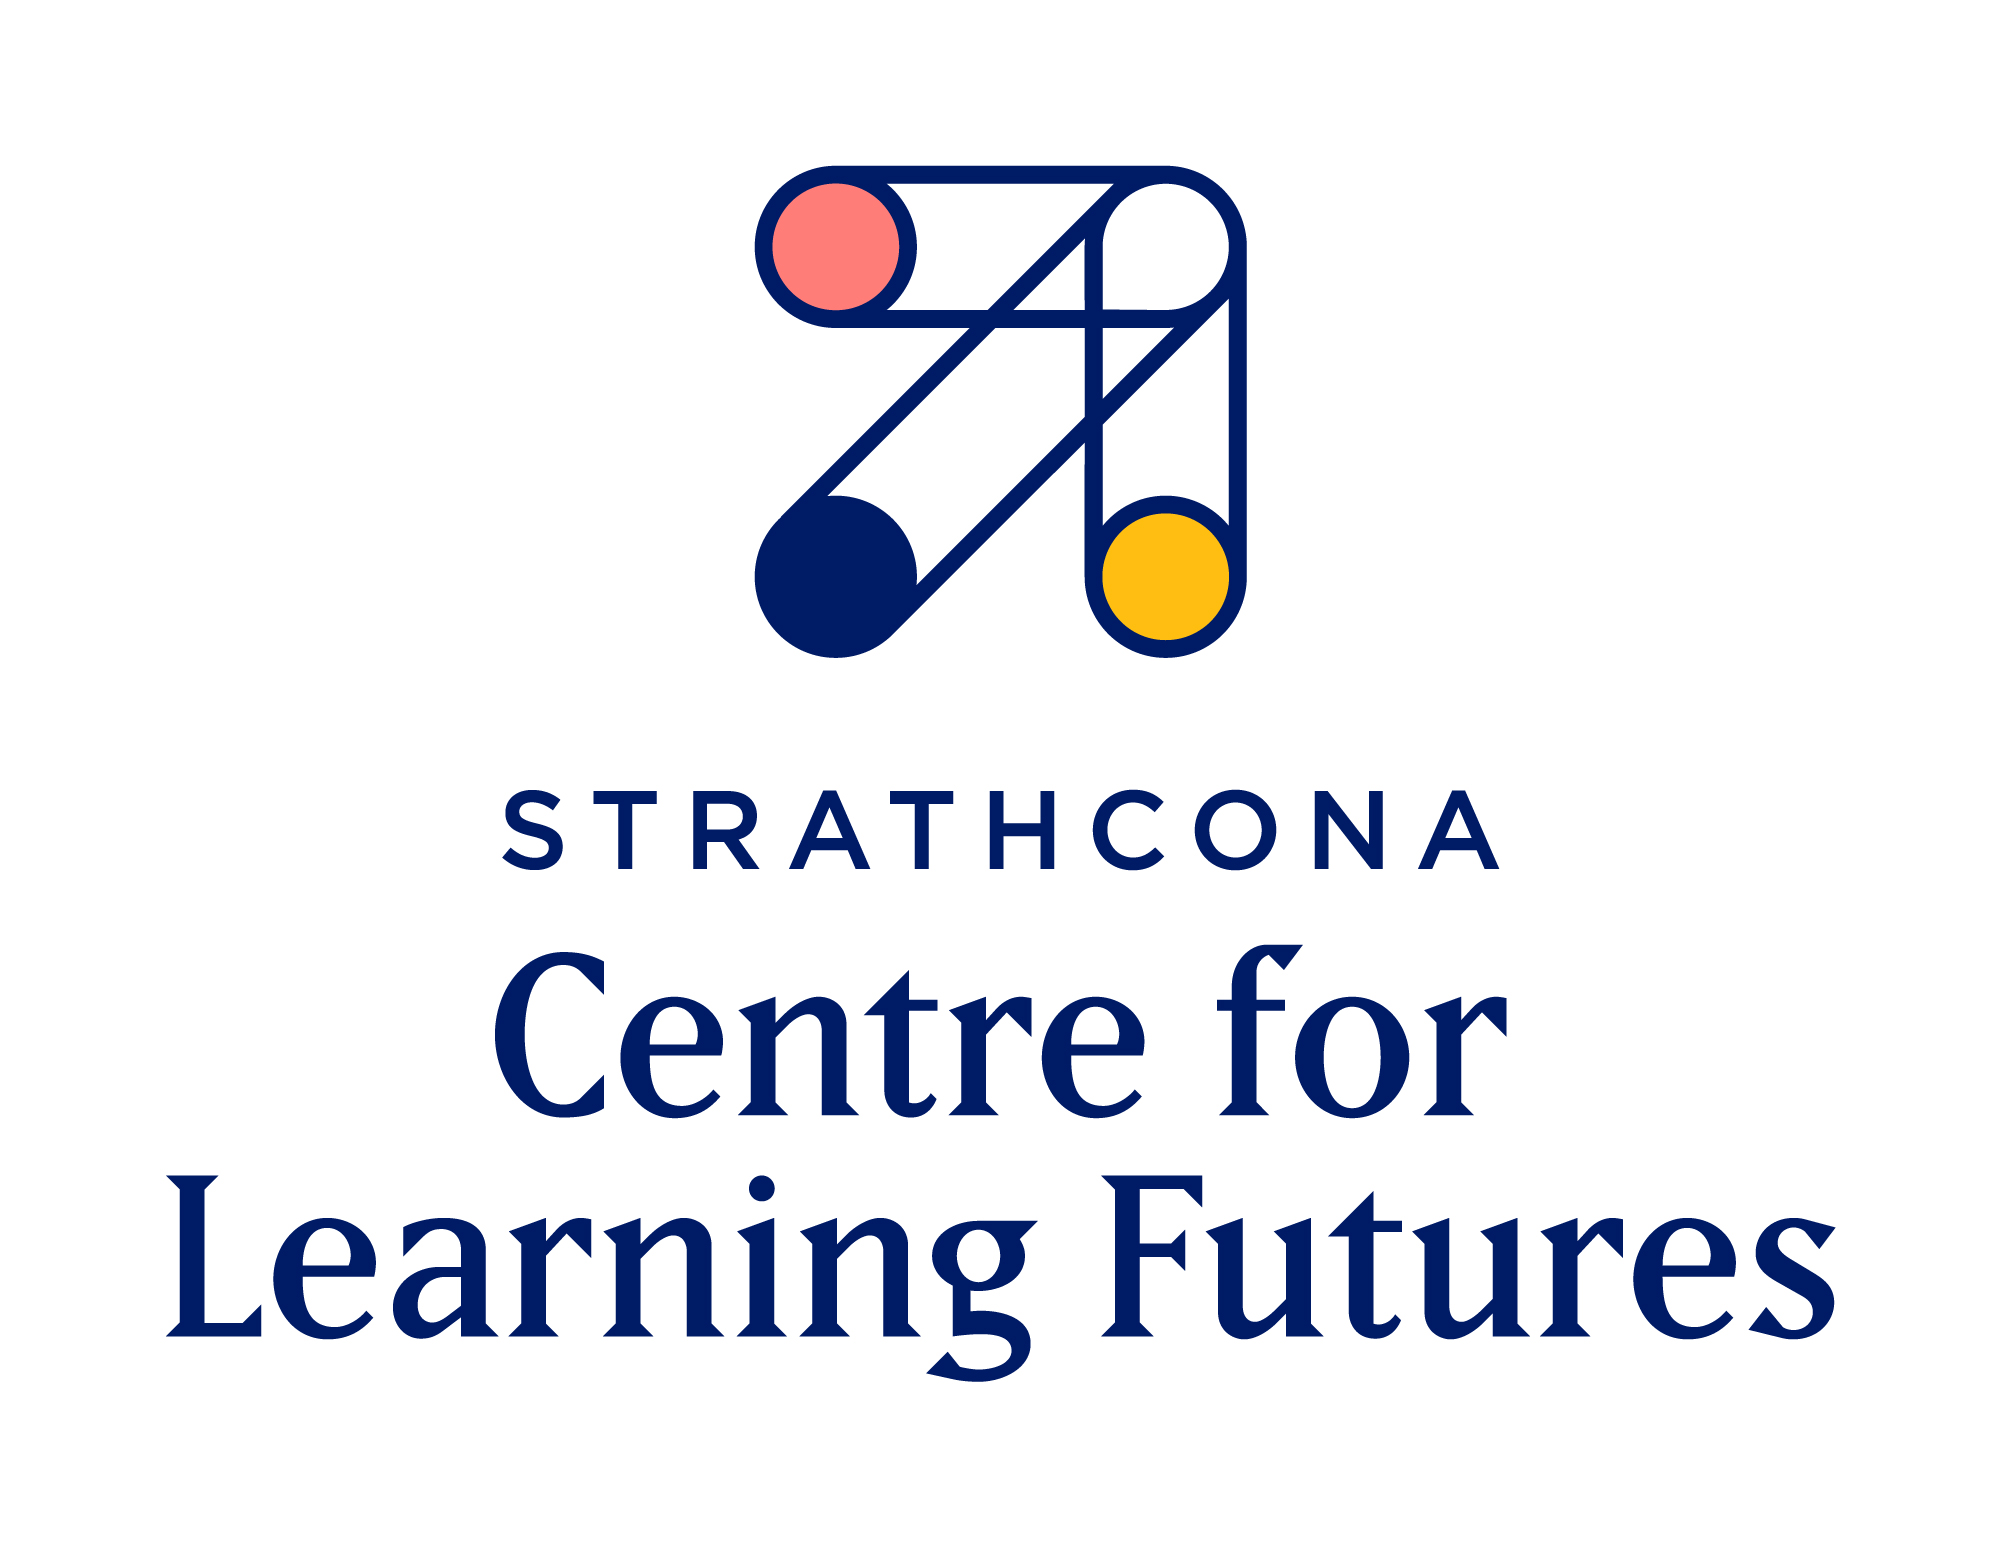 Centre for learning futures